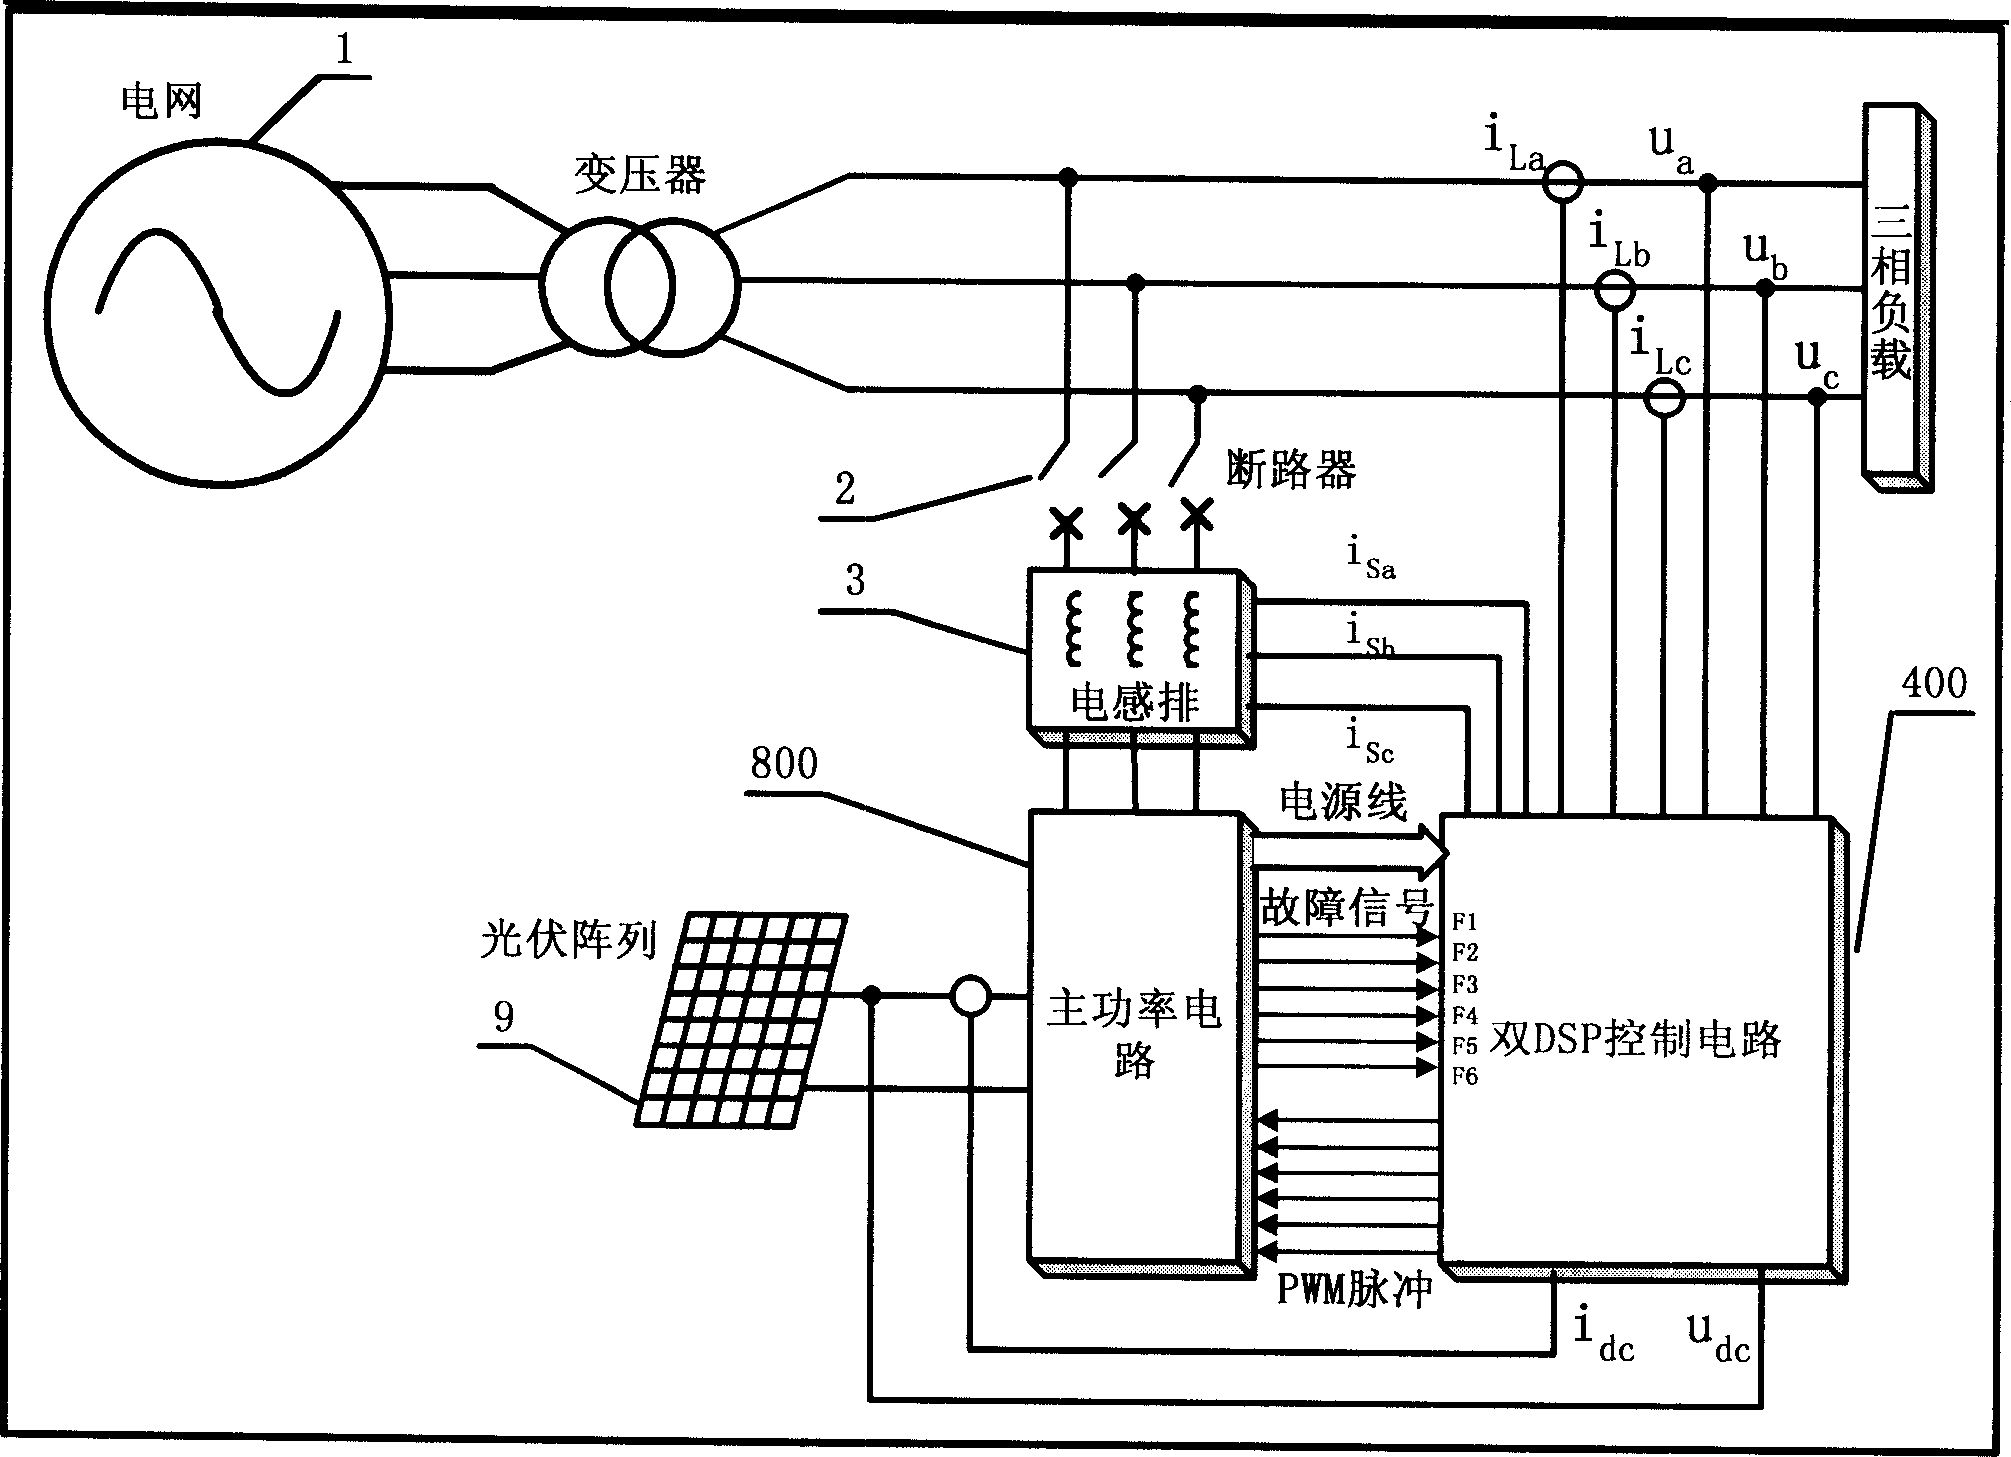 Dual-DSP control circuit of photovoltaic grid-connected device with STATCOM function